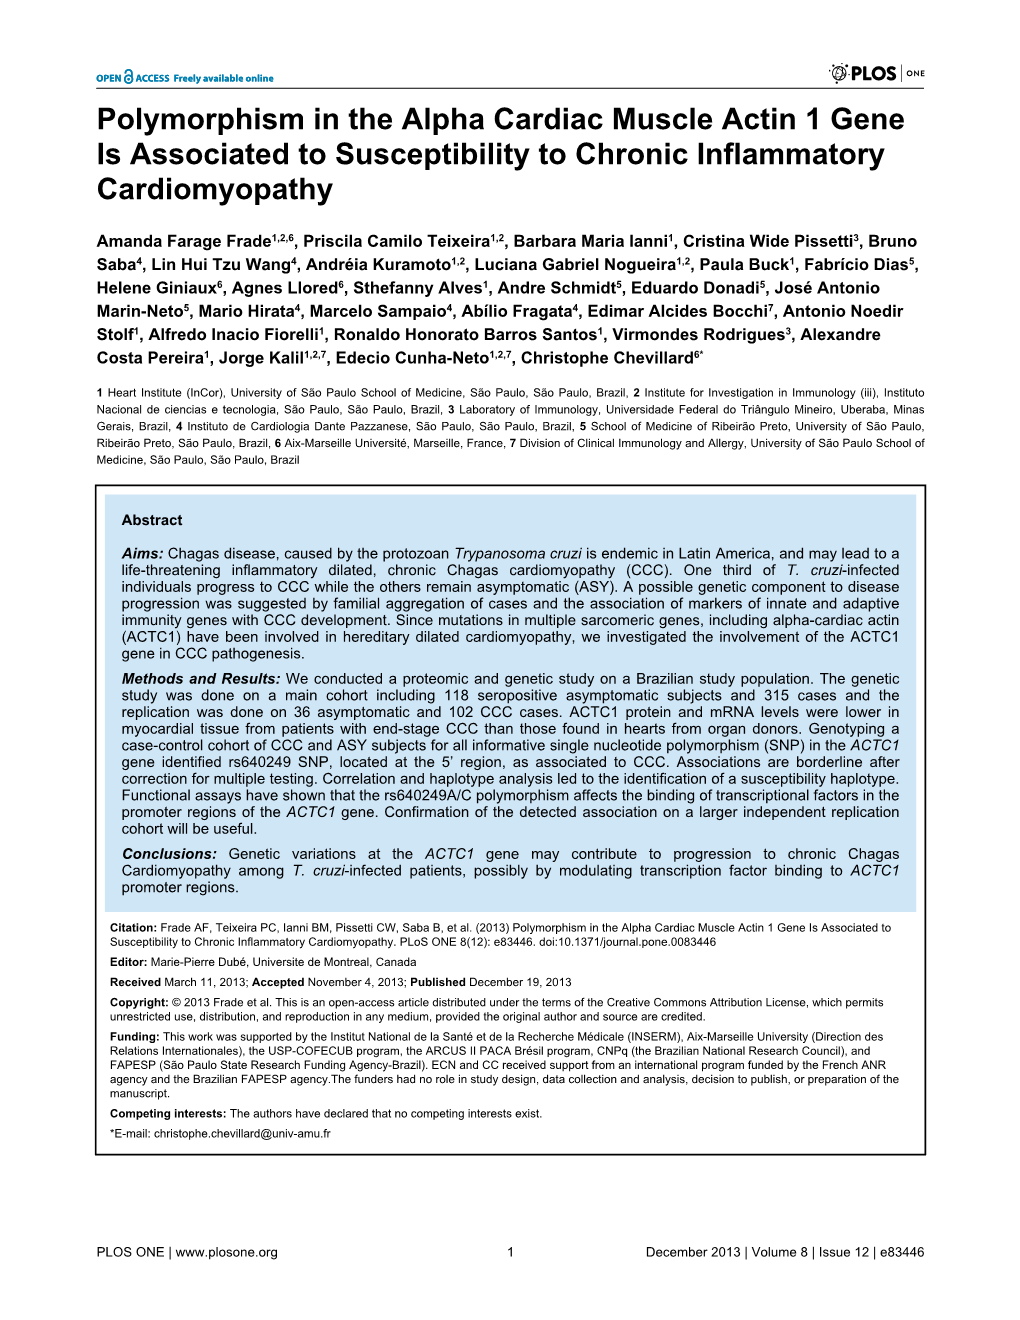 Polymorphism in the Alpha Cardiac Muscle Actin 1 Gene Is Associated to Susceptibility to Chronic Inflammatory Cardiomyopathy